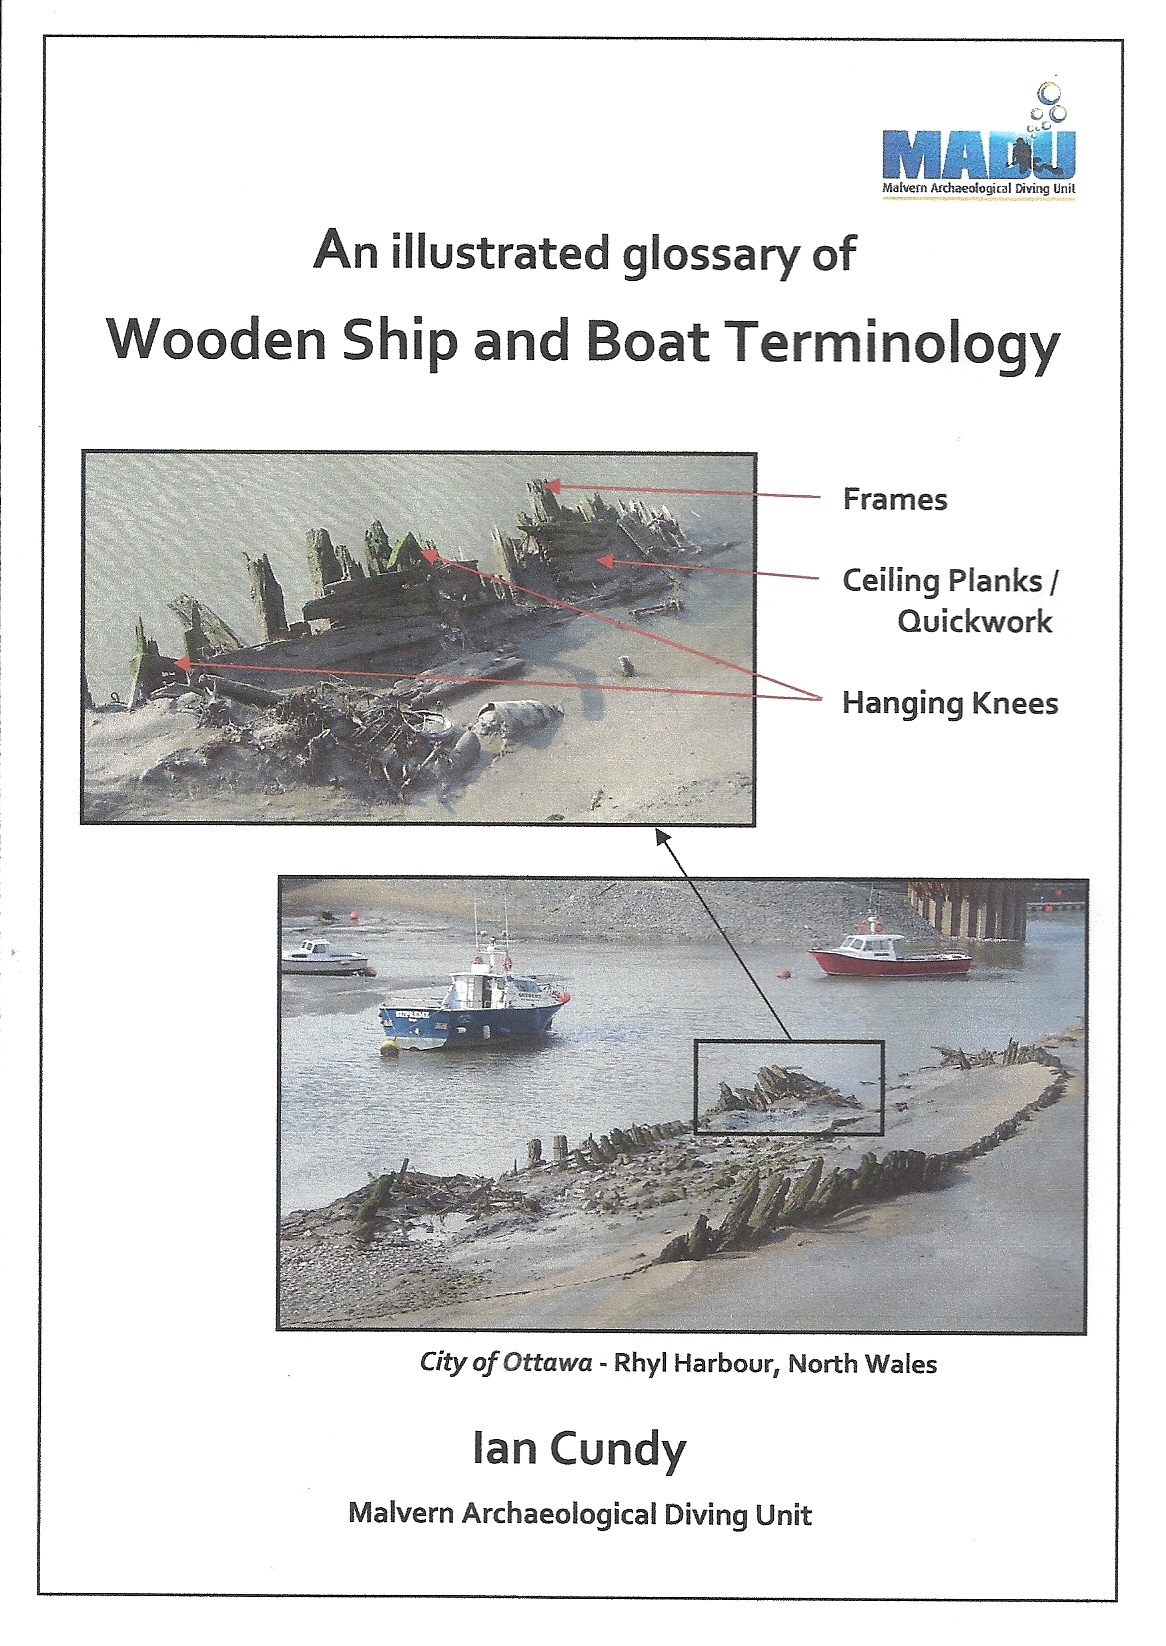 An Illustrated Glossary of Wooden Ship & Boat Terminology